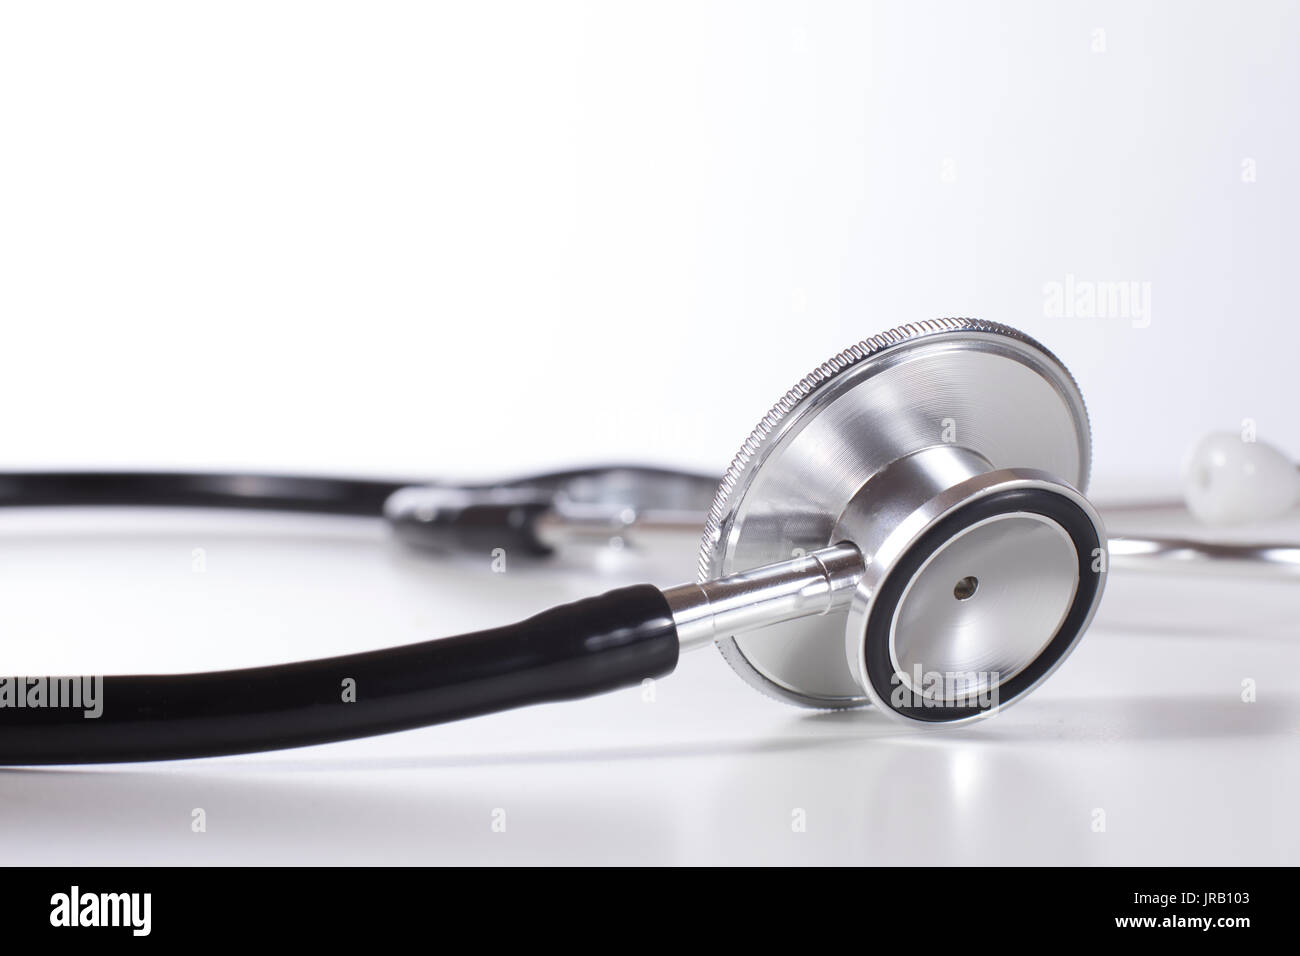 Chestpiece of acoustic stethoscope in close-up against plain background Stock Photo